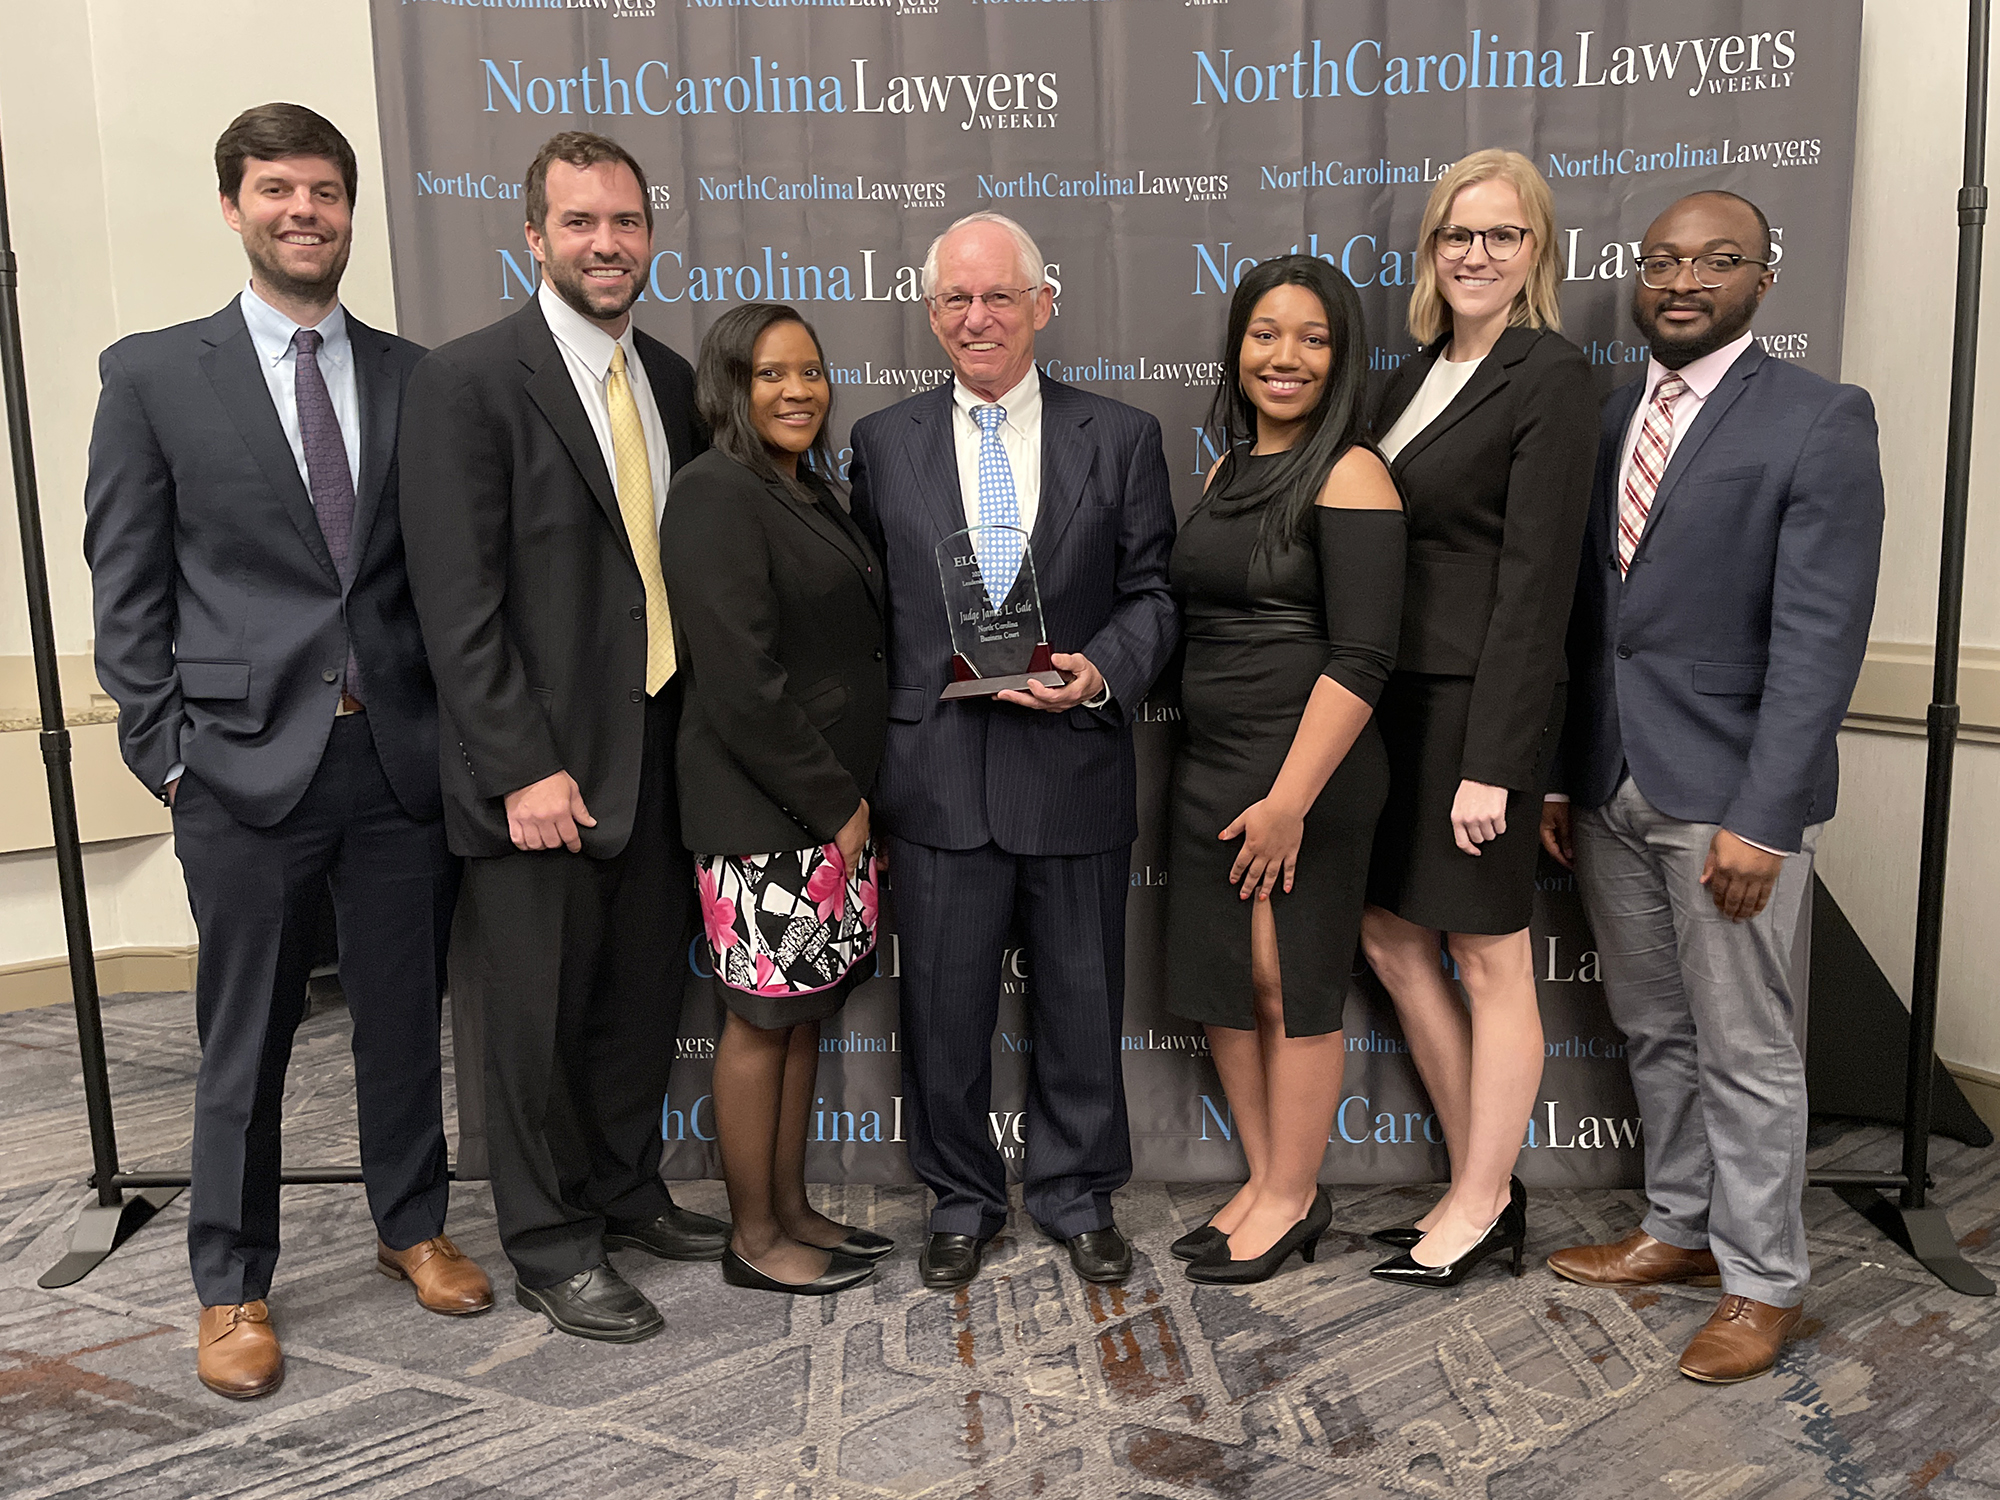 Elon University / Today at Elon / Business Court judge honored with Elon Law leadership award